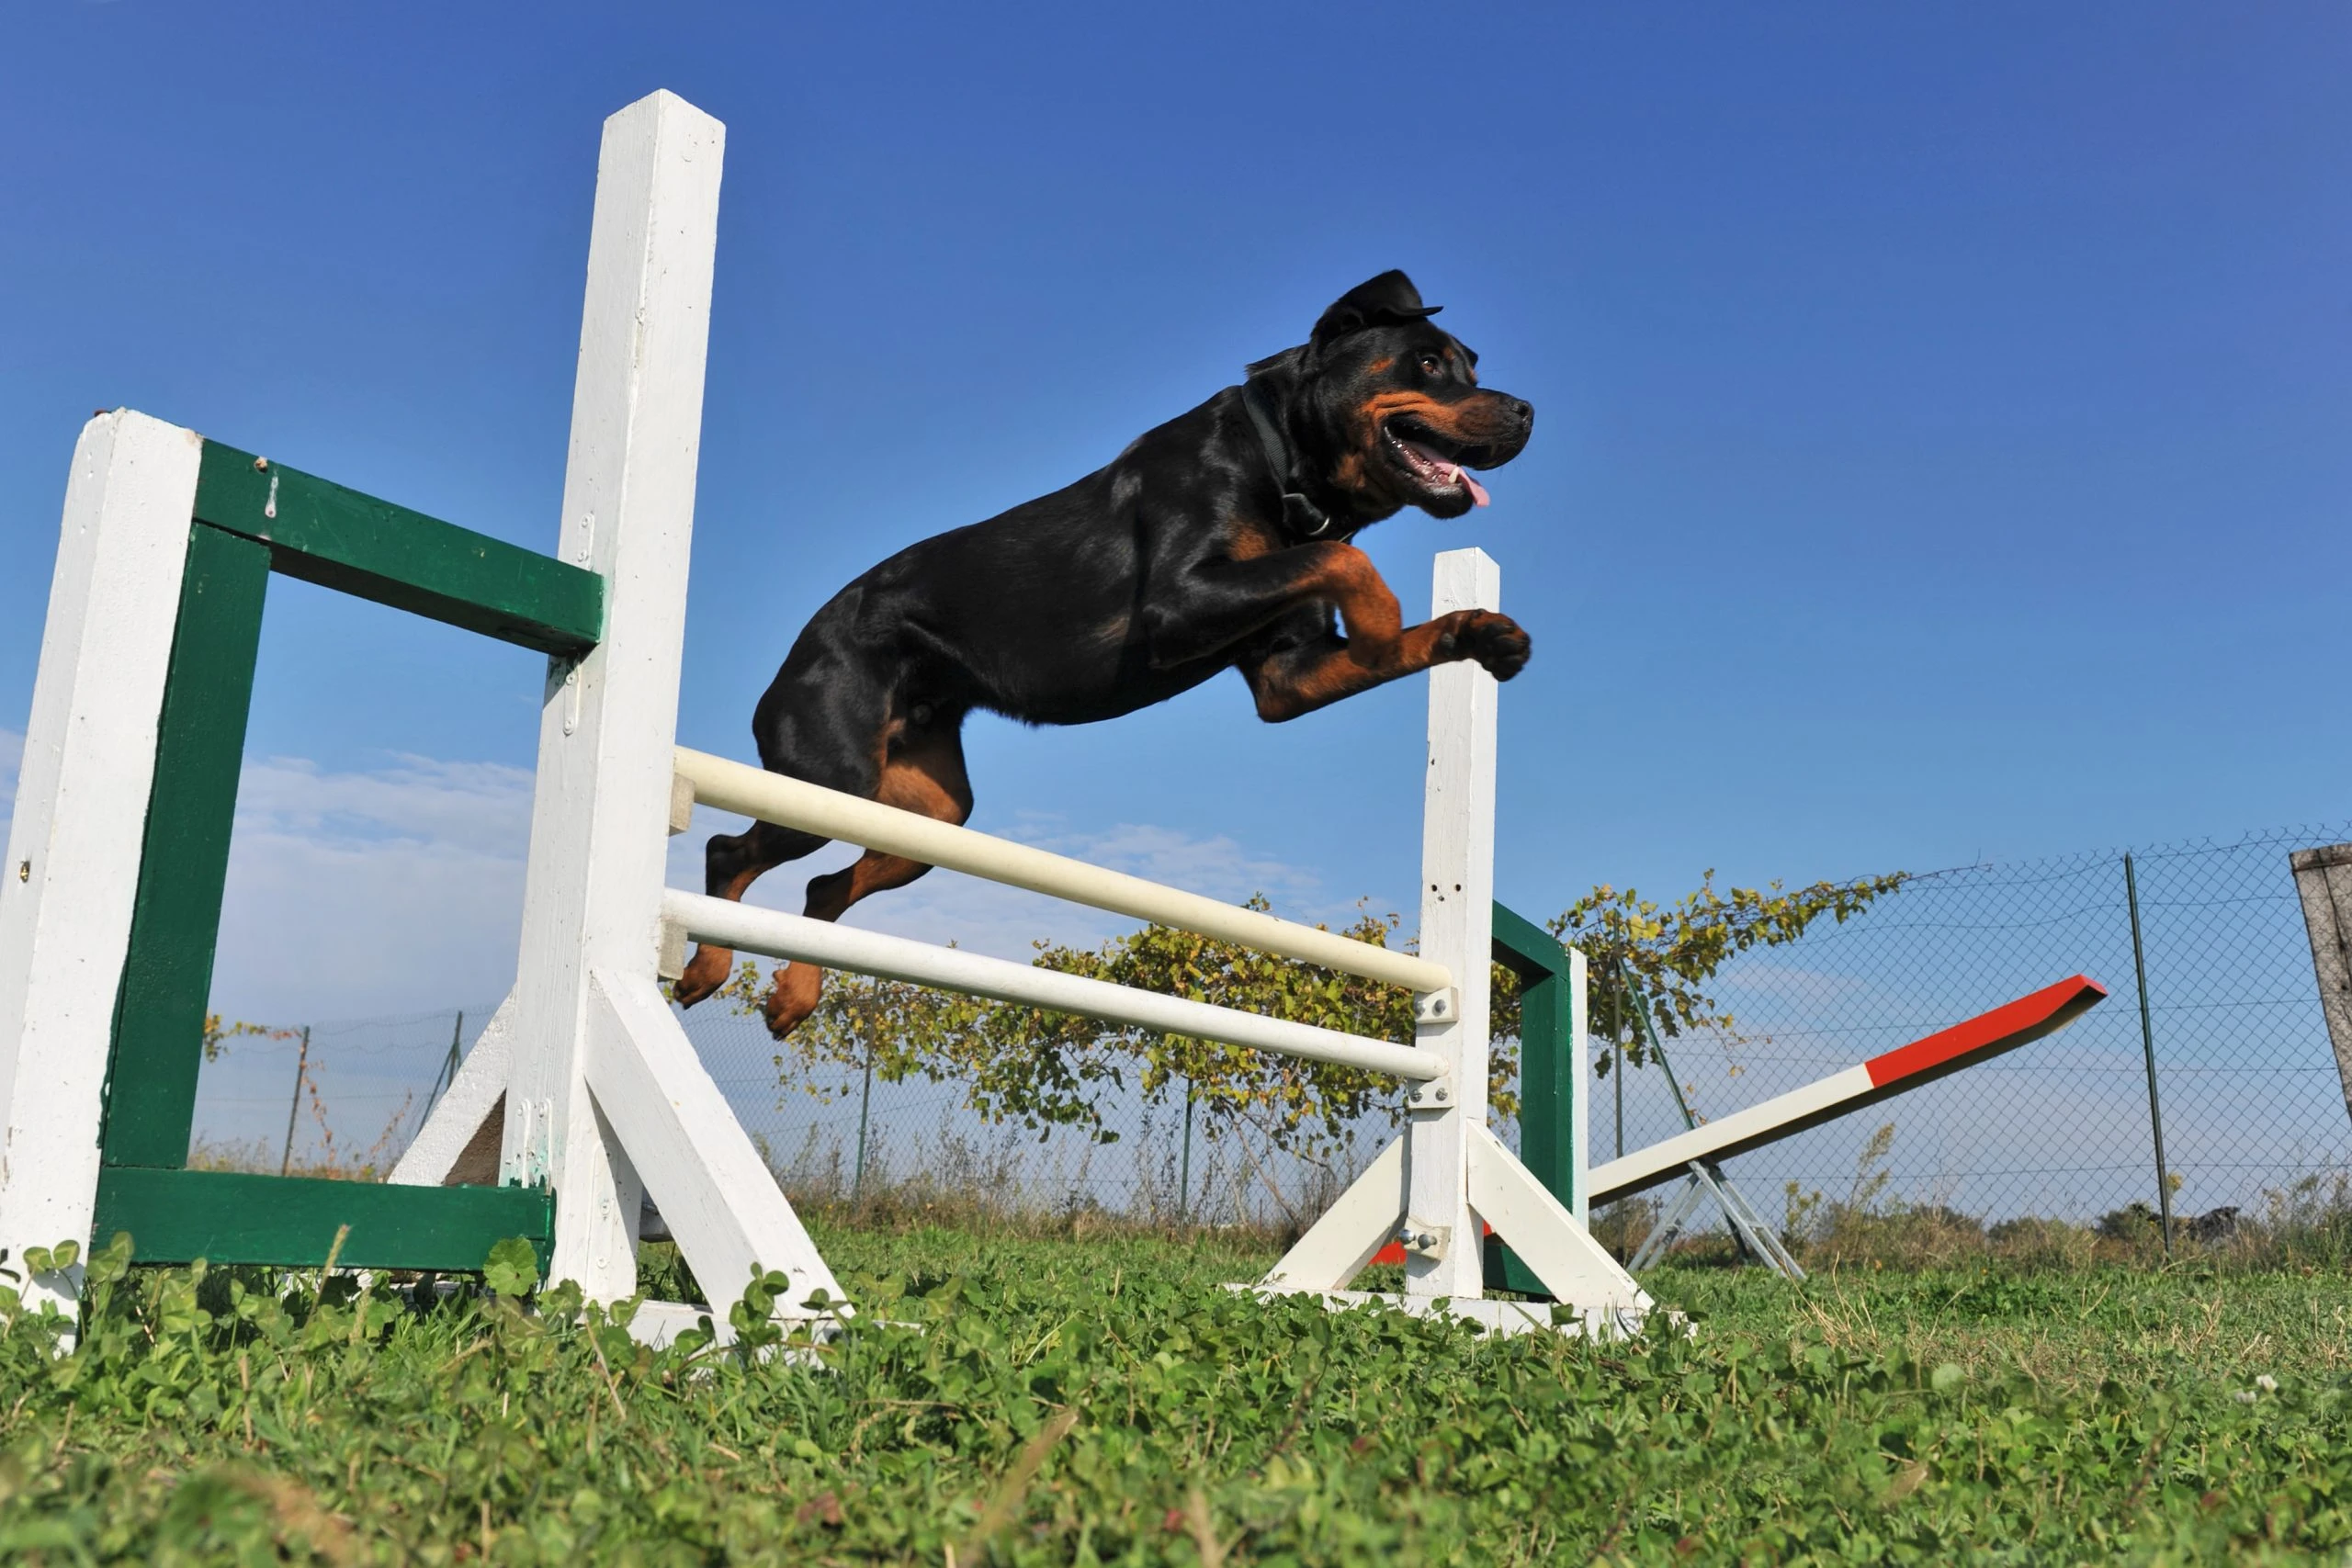 The Advantages of Dog Agility Training and How to Get Started